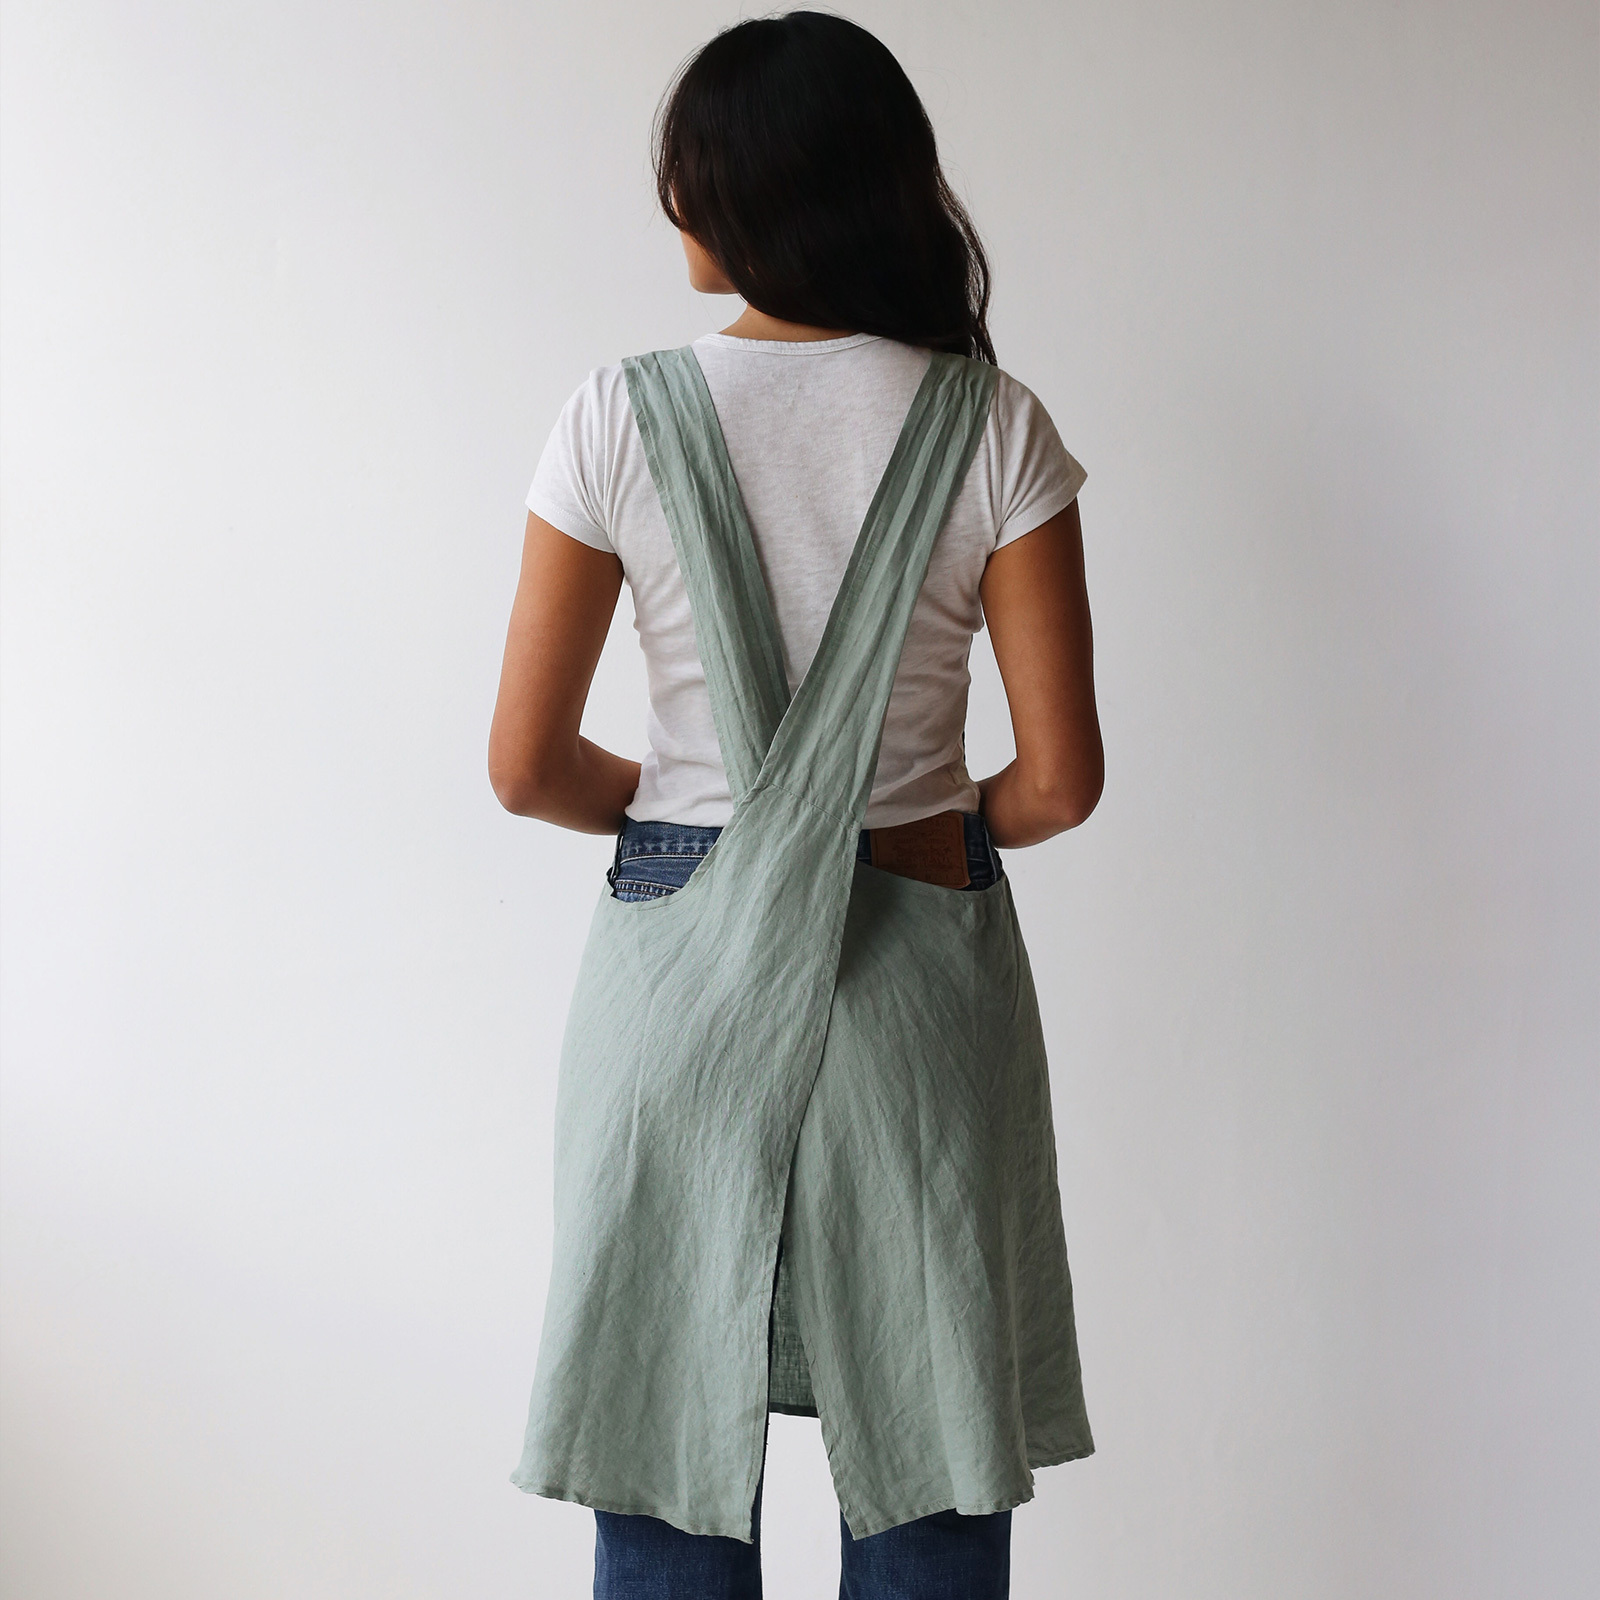 French linen Apron in Sage